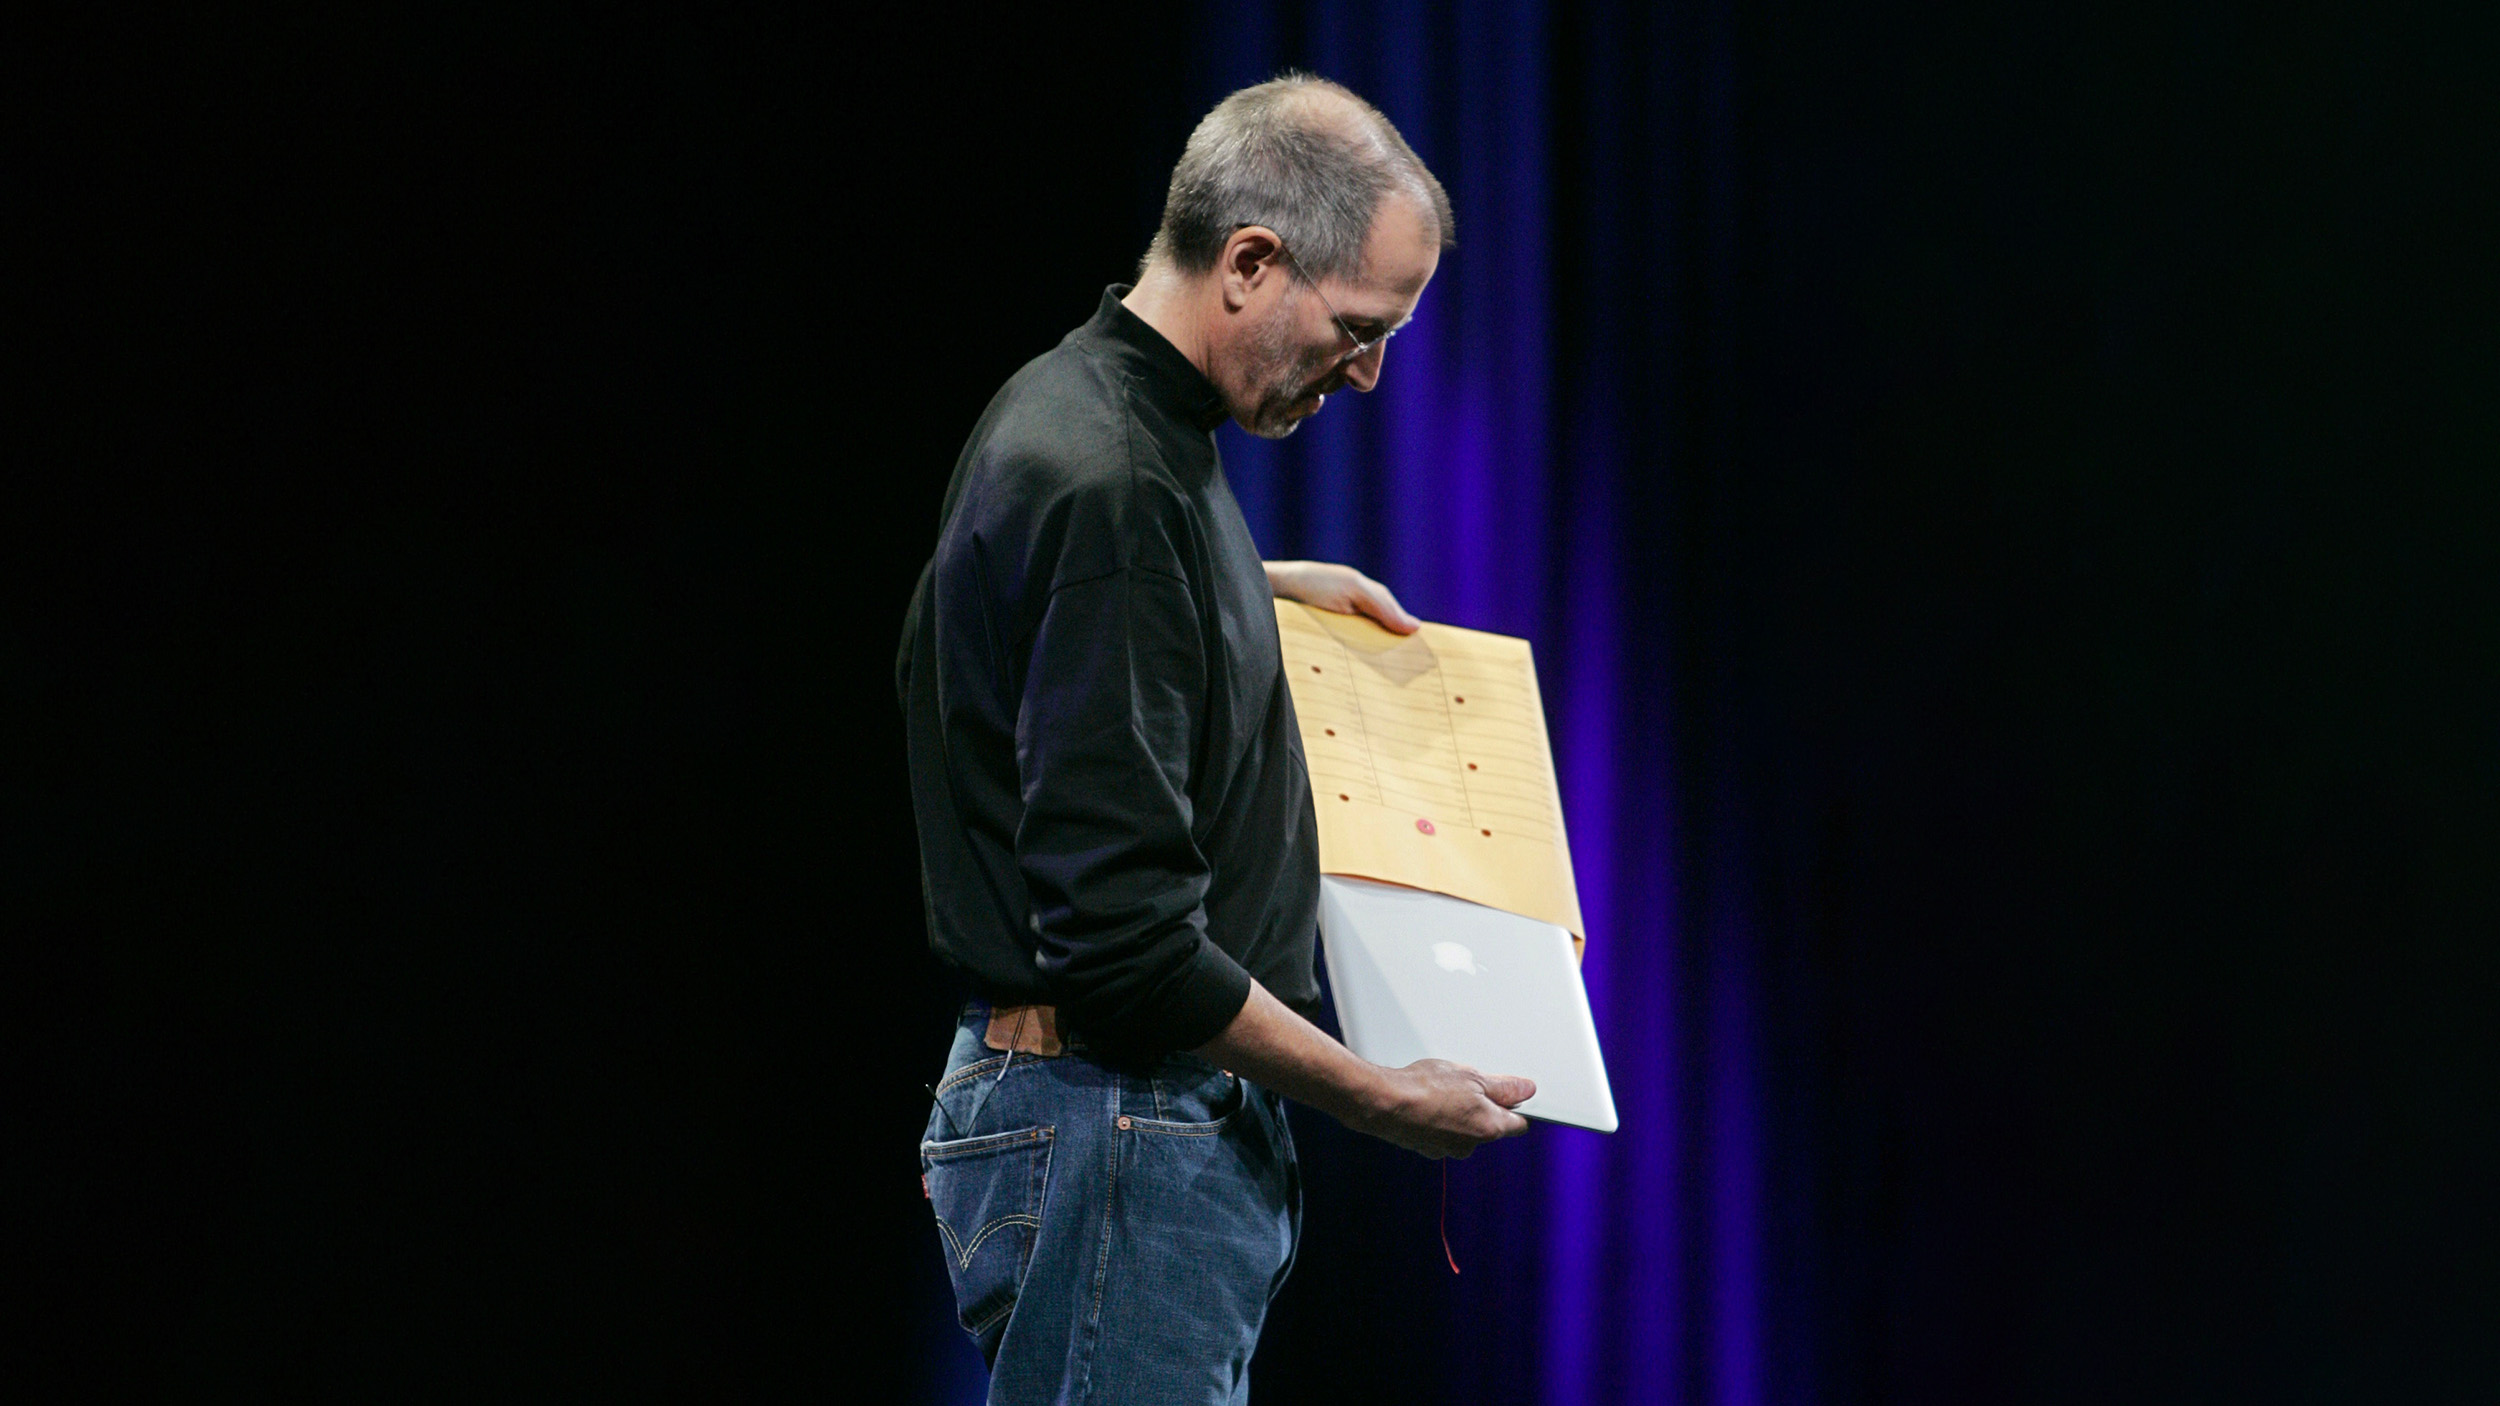 MacBook Air Turns 15 Today: ‘The World’s Thinnest Notebook’